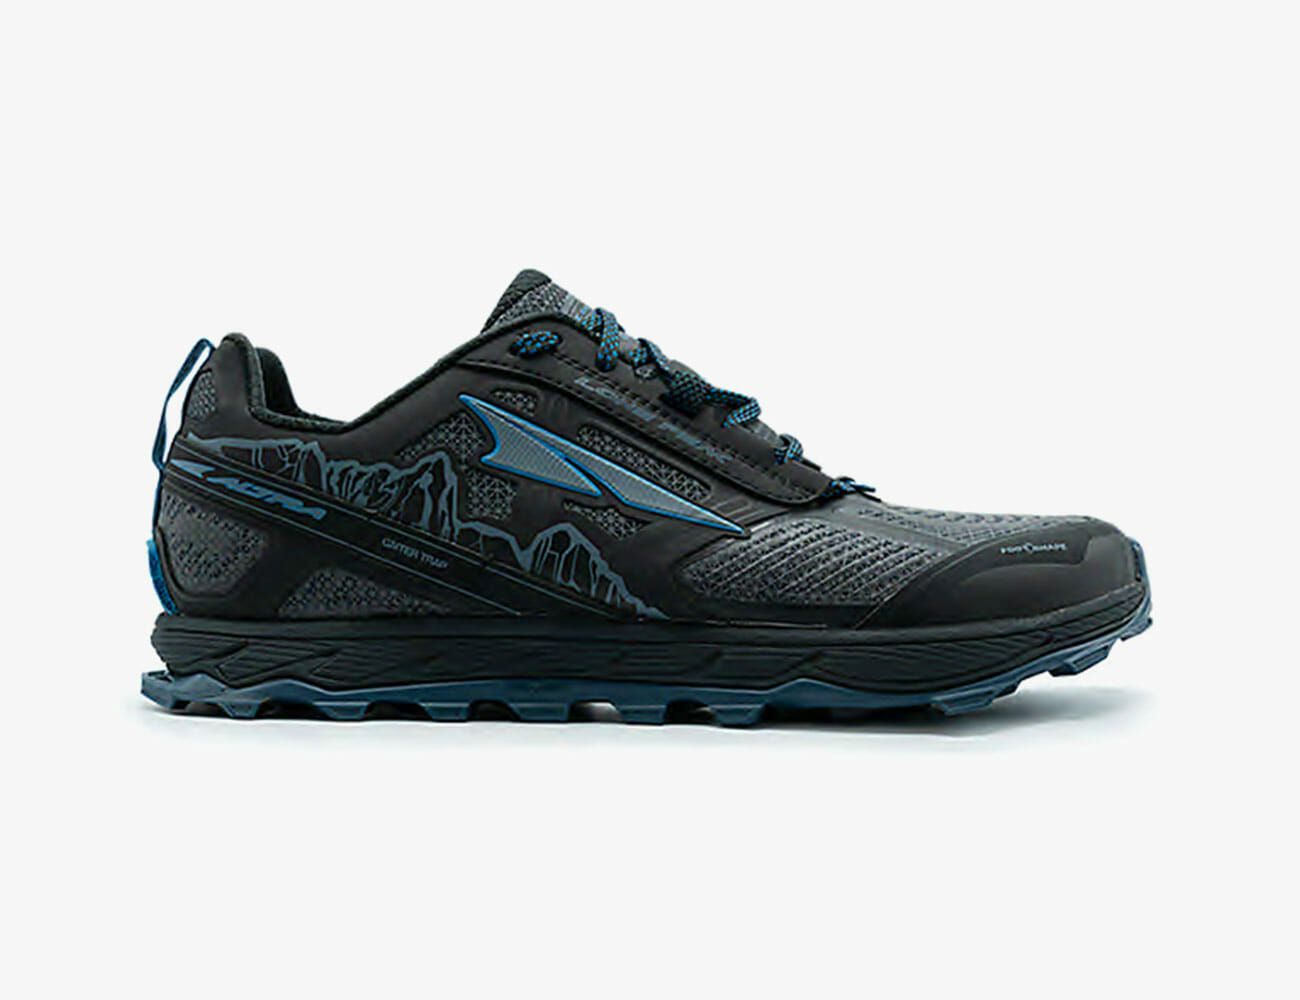 snow trail running shoes